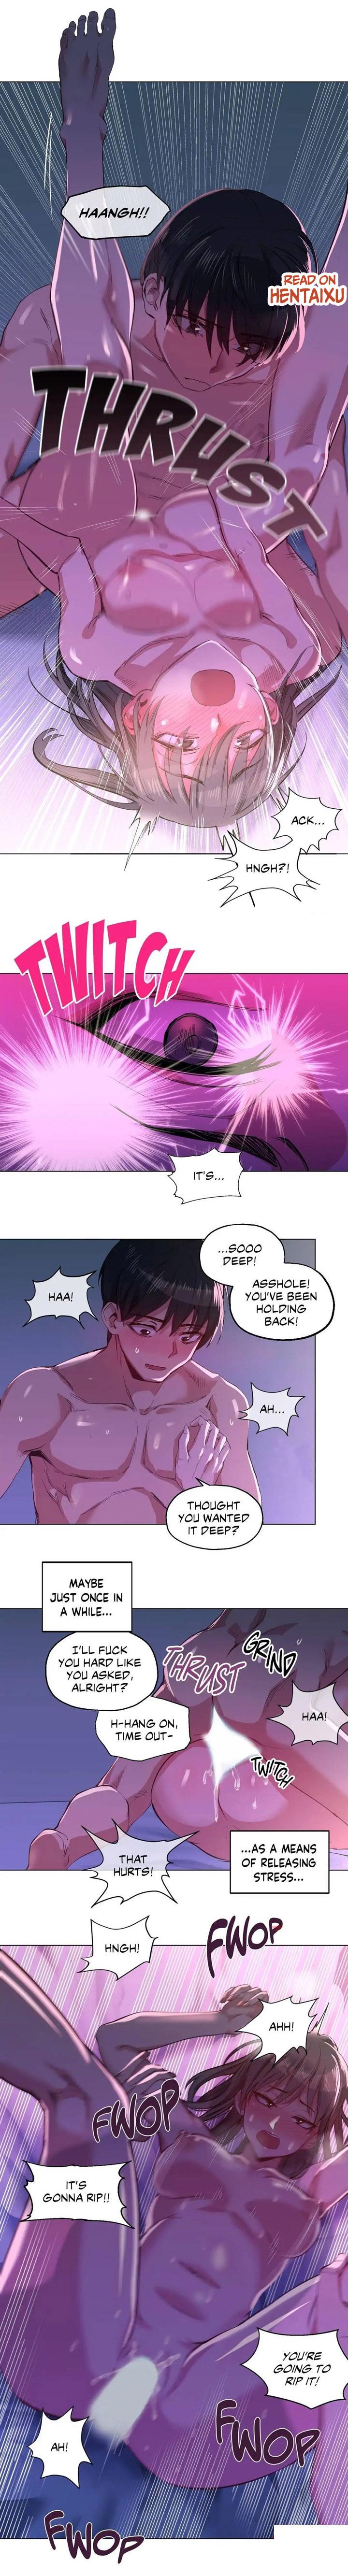 1080p Lucky Guy Ch.5/? Chubby - Page 73